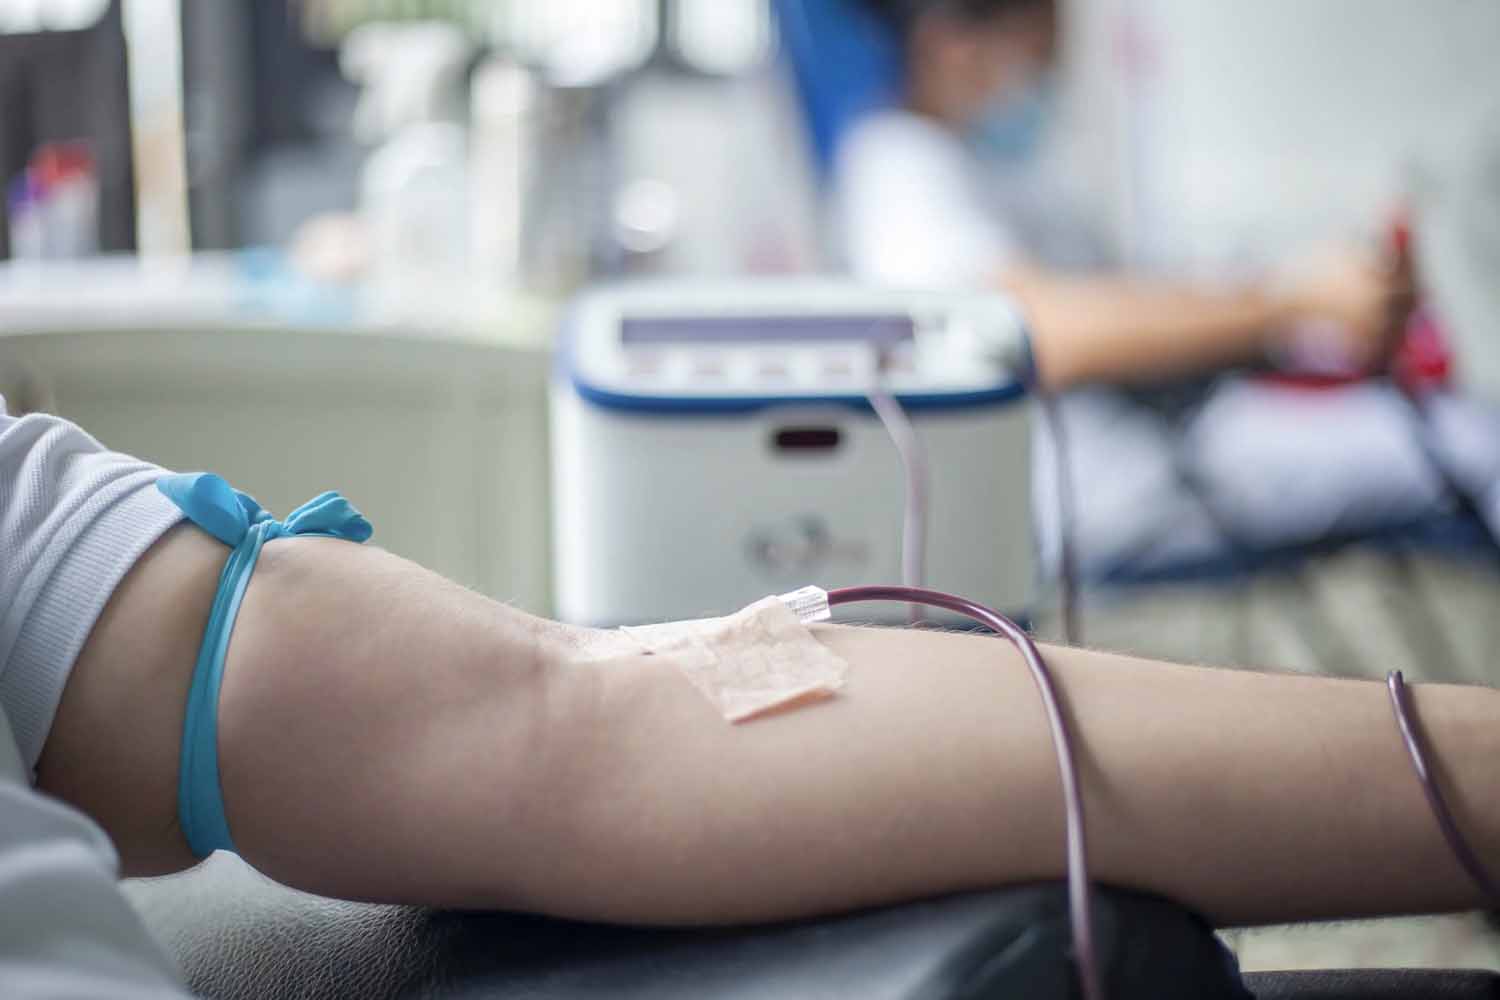 Arm of person donating blood